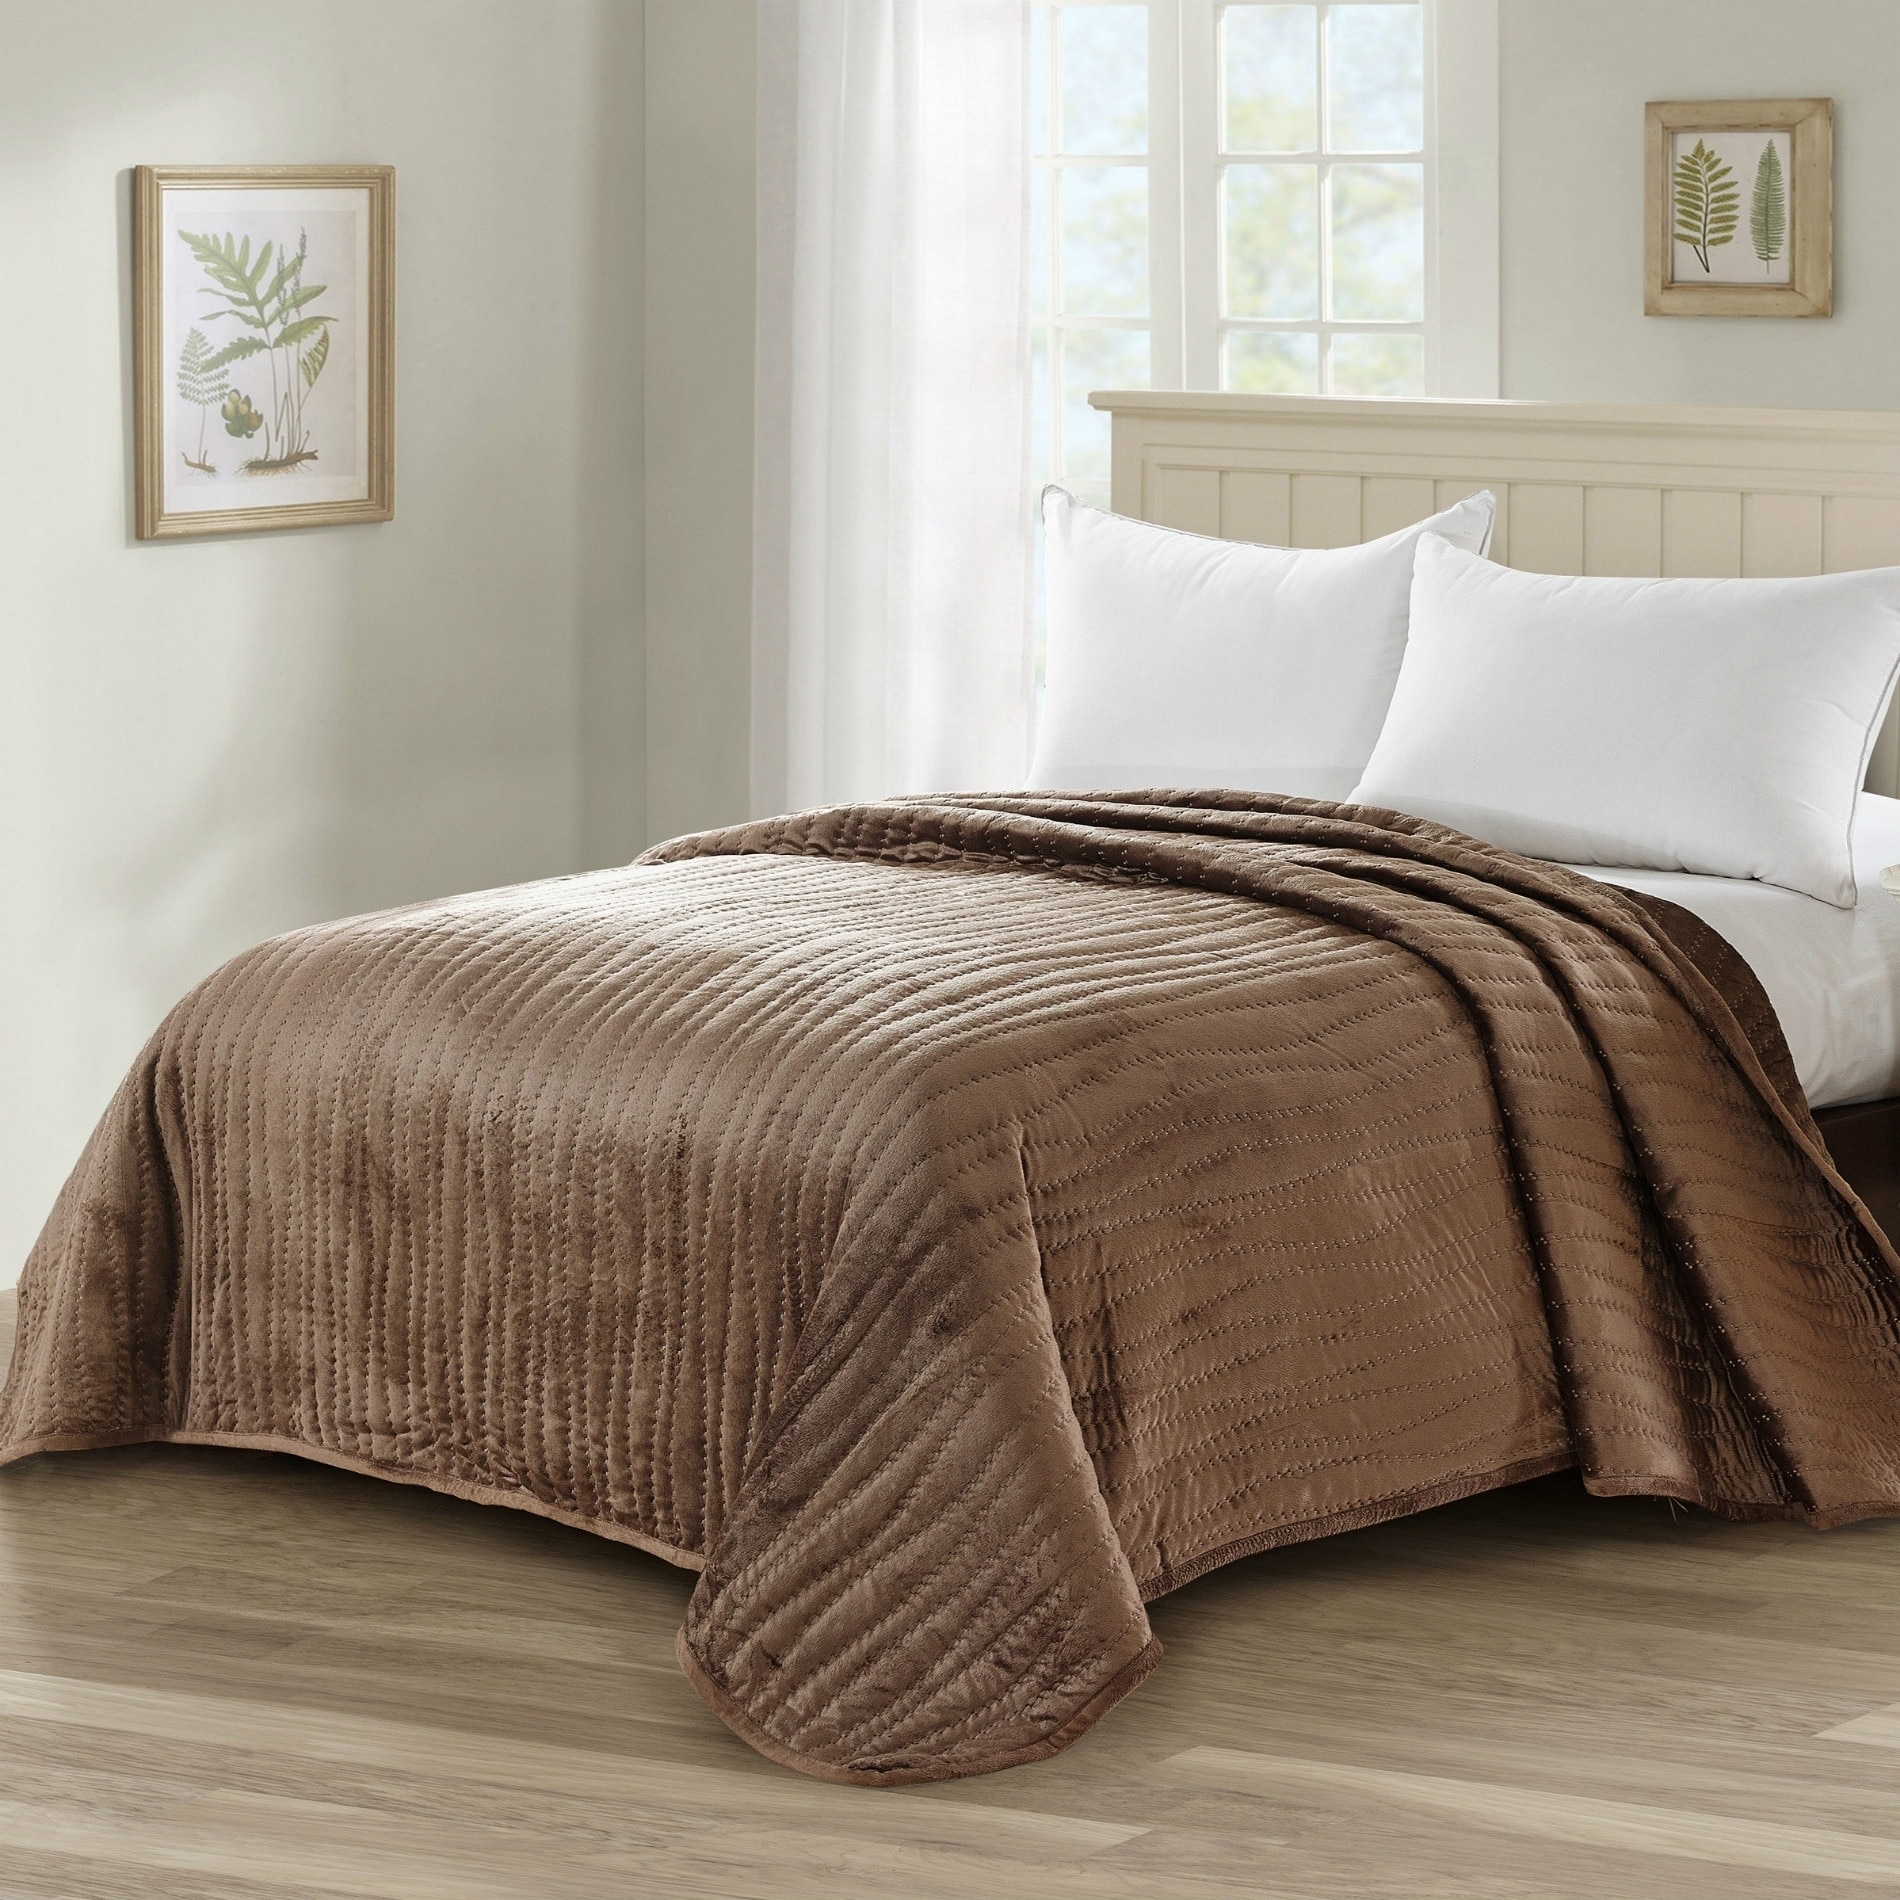 Shop Serenta Microplush Quilted Coverlet On Sale Free Shipping